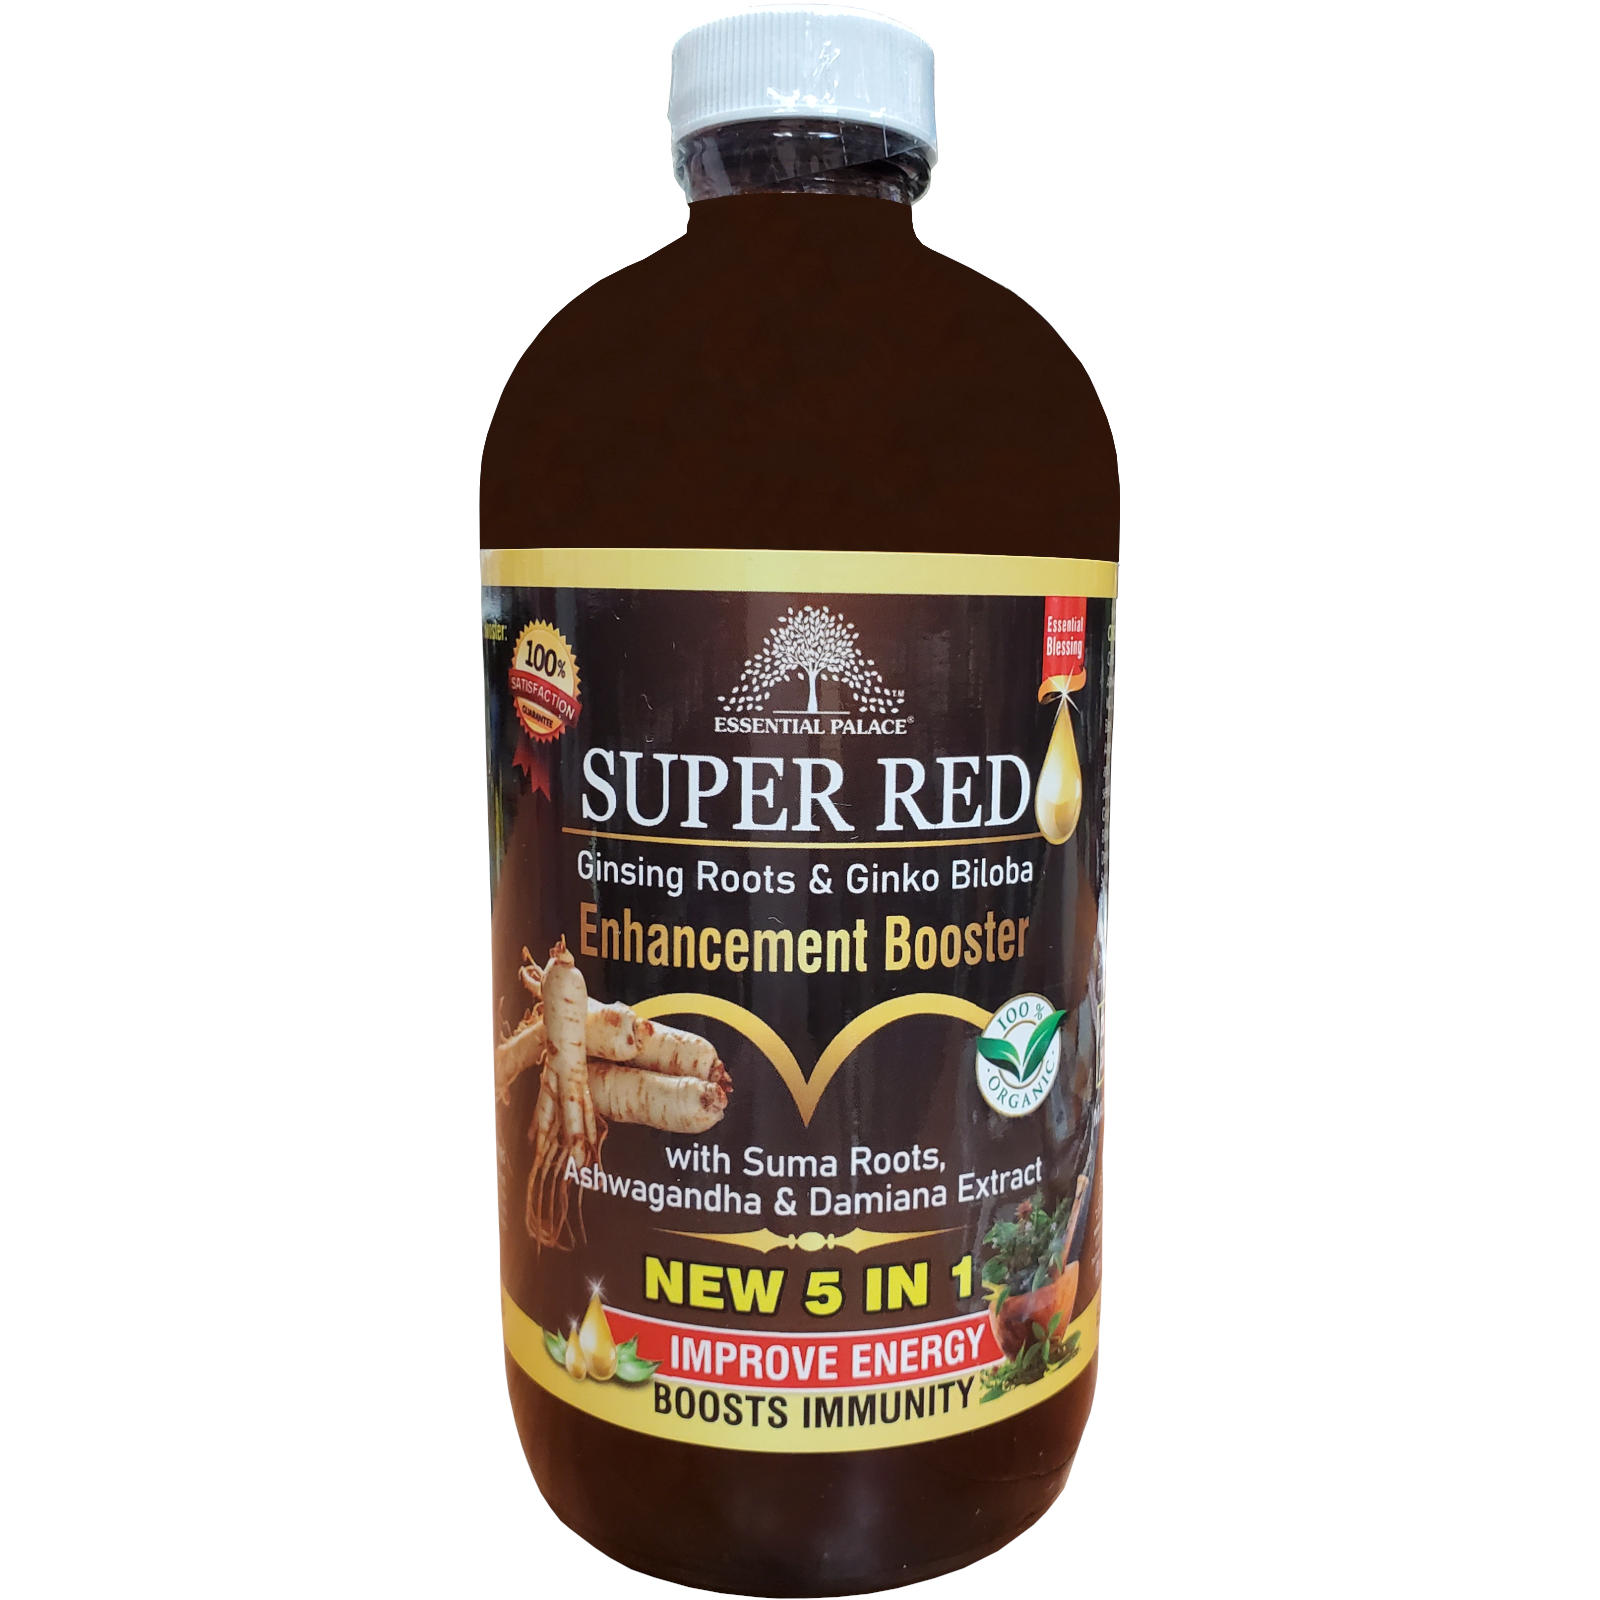 Essential Palace Organic Super Red With Ginsing Roots & Ginko Biloba 5 IN 1 16 OZ Front